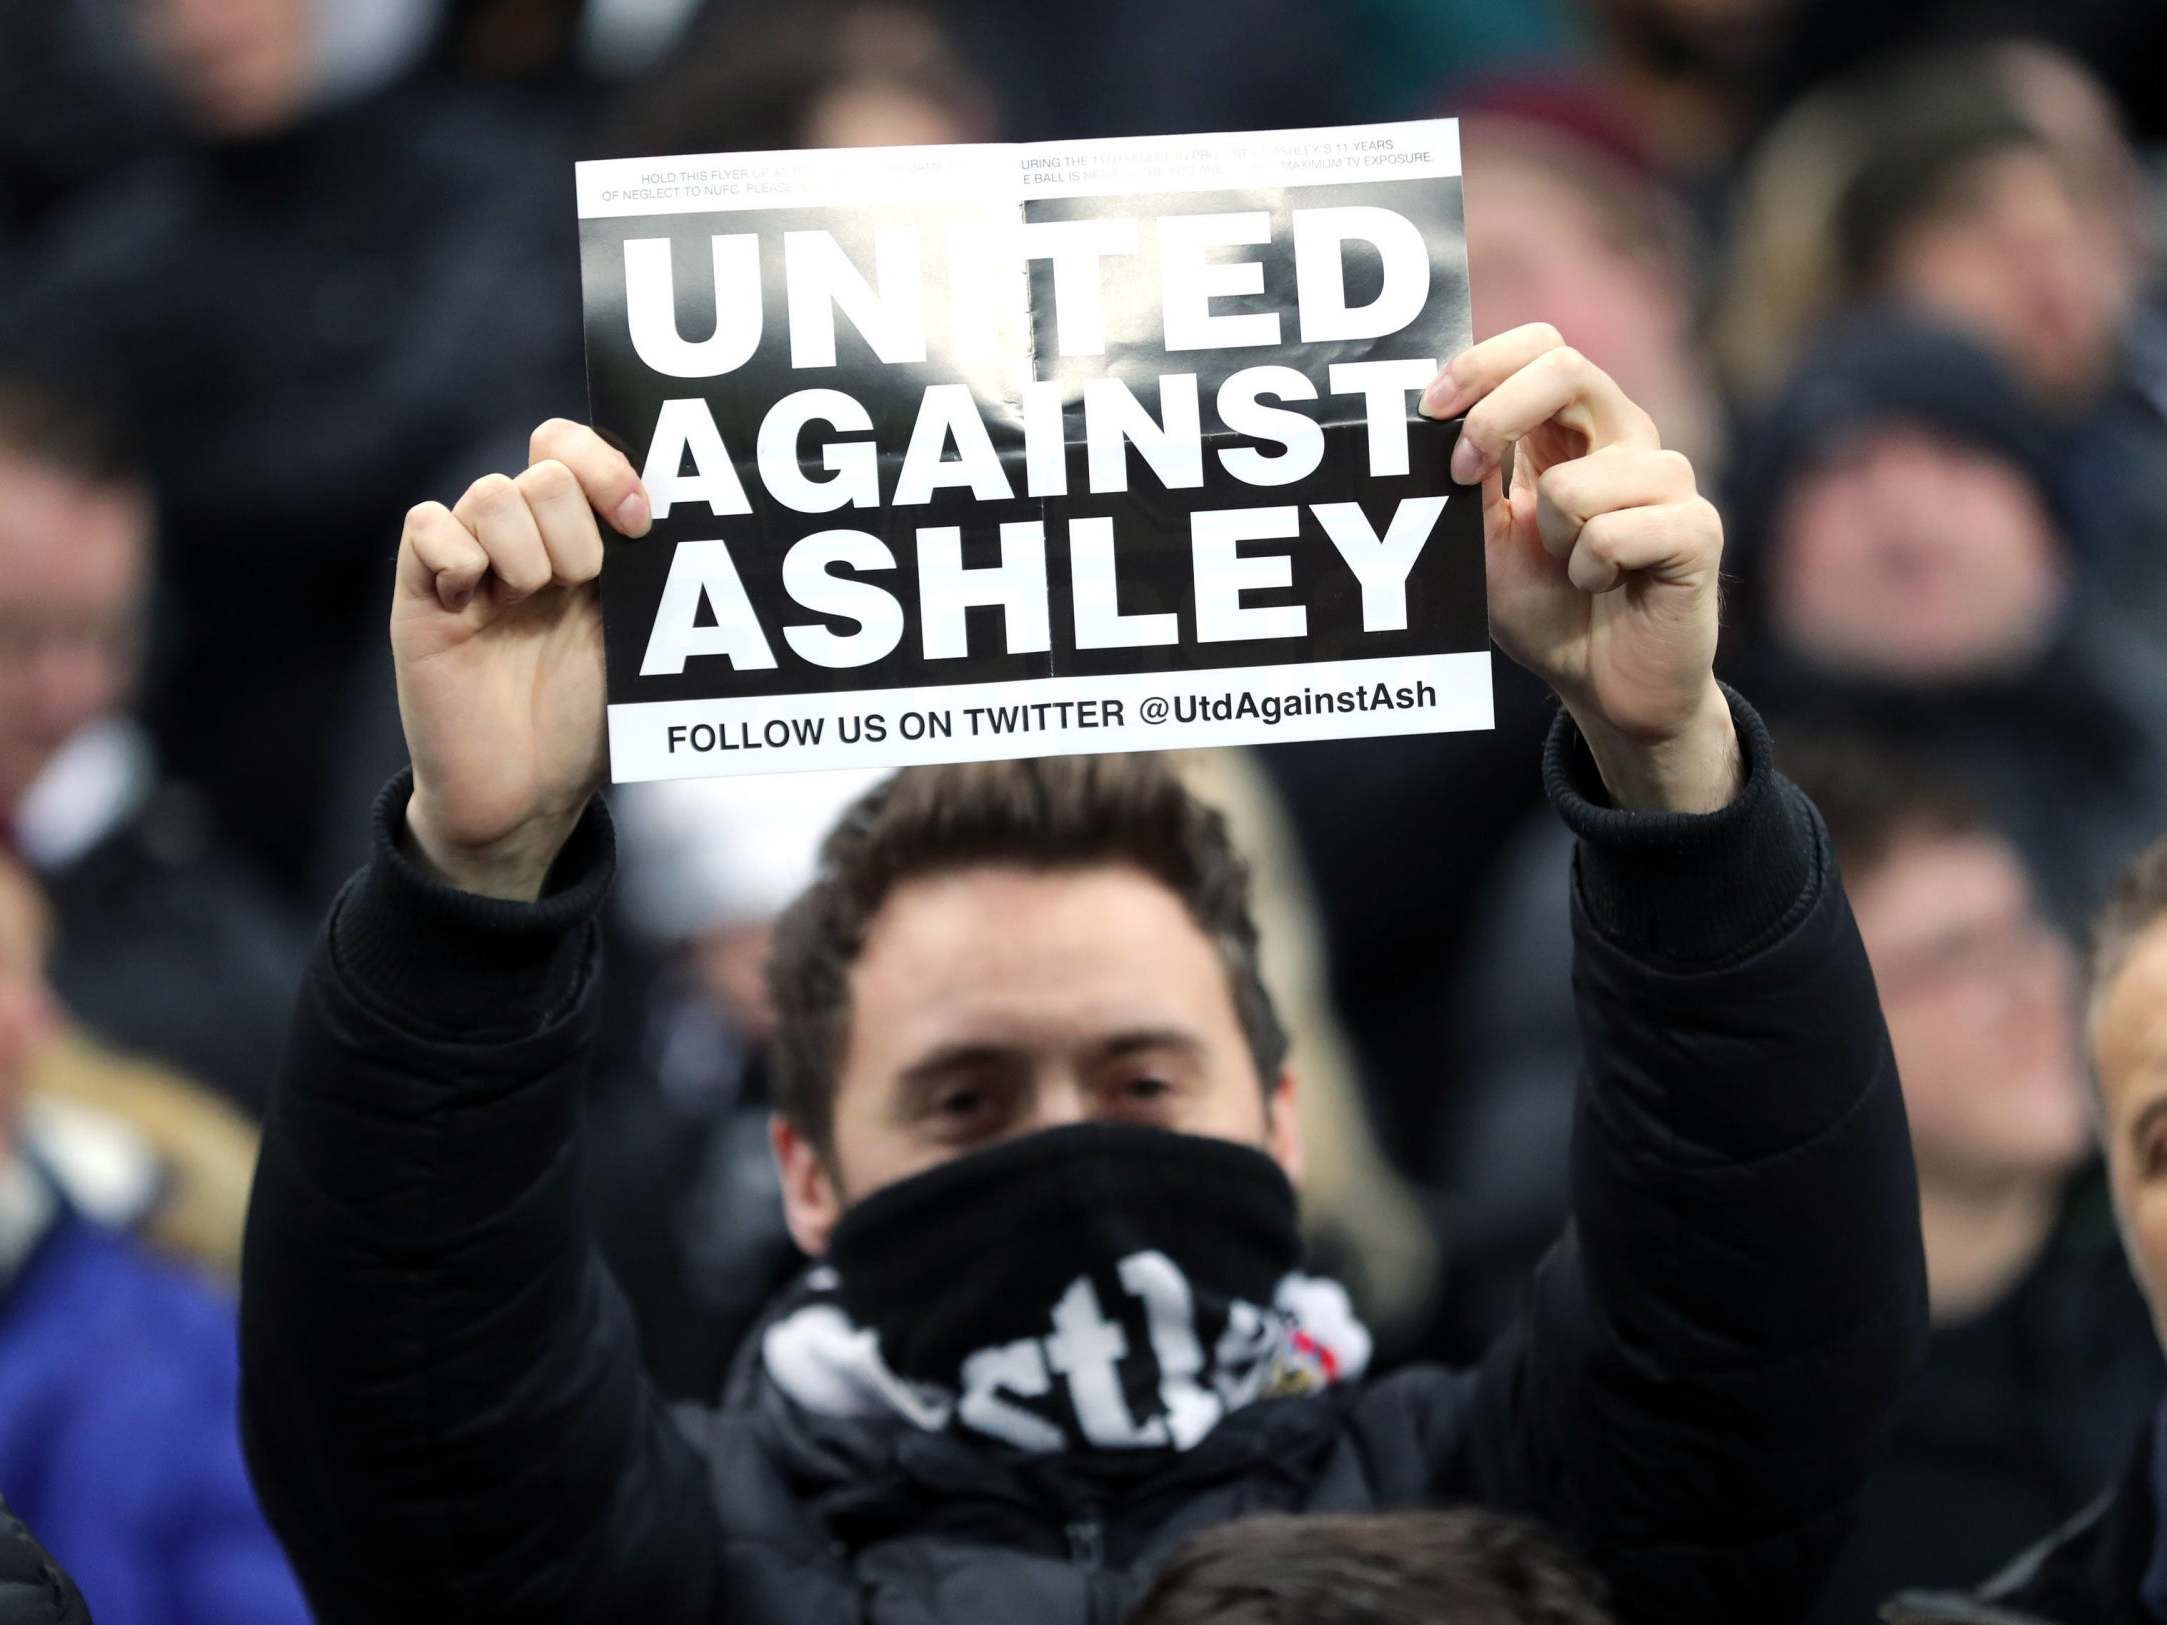 Newcastle fans have grown tired with Ashley's reign as club owner